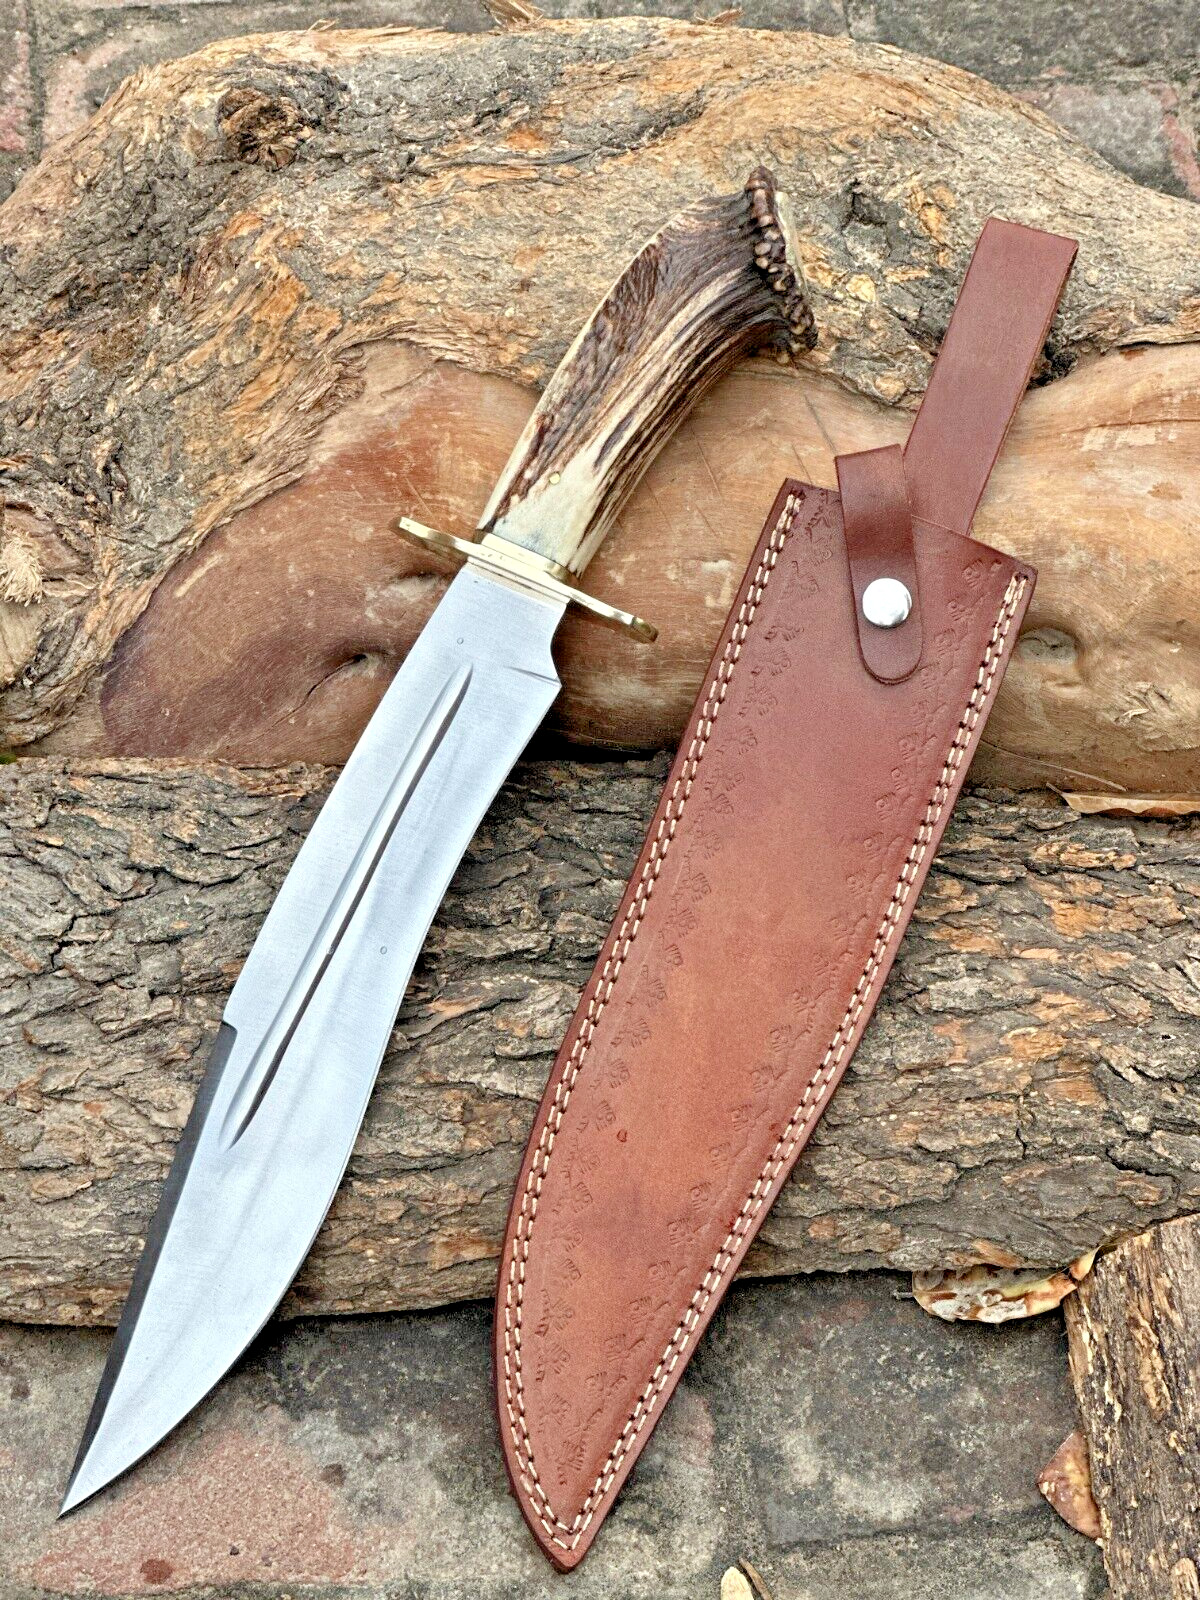 FANCY ANTIQUE CUSTOM HANDMADE STAINLESS STEEL HUNTING FIXED BLADE BOWIE KNIFE